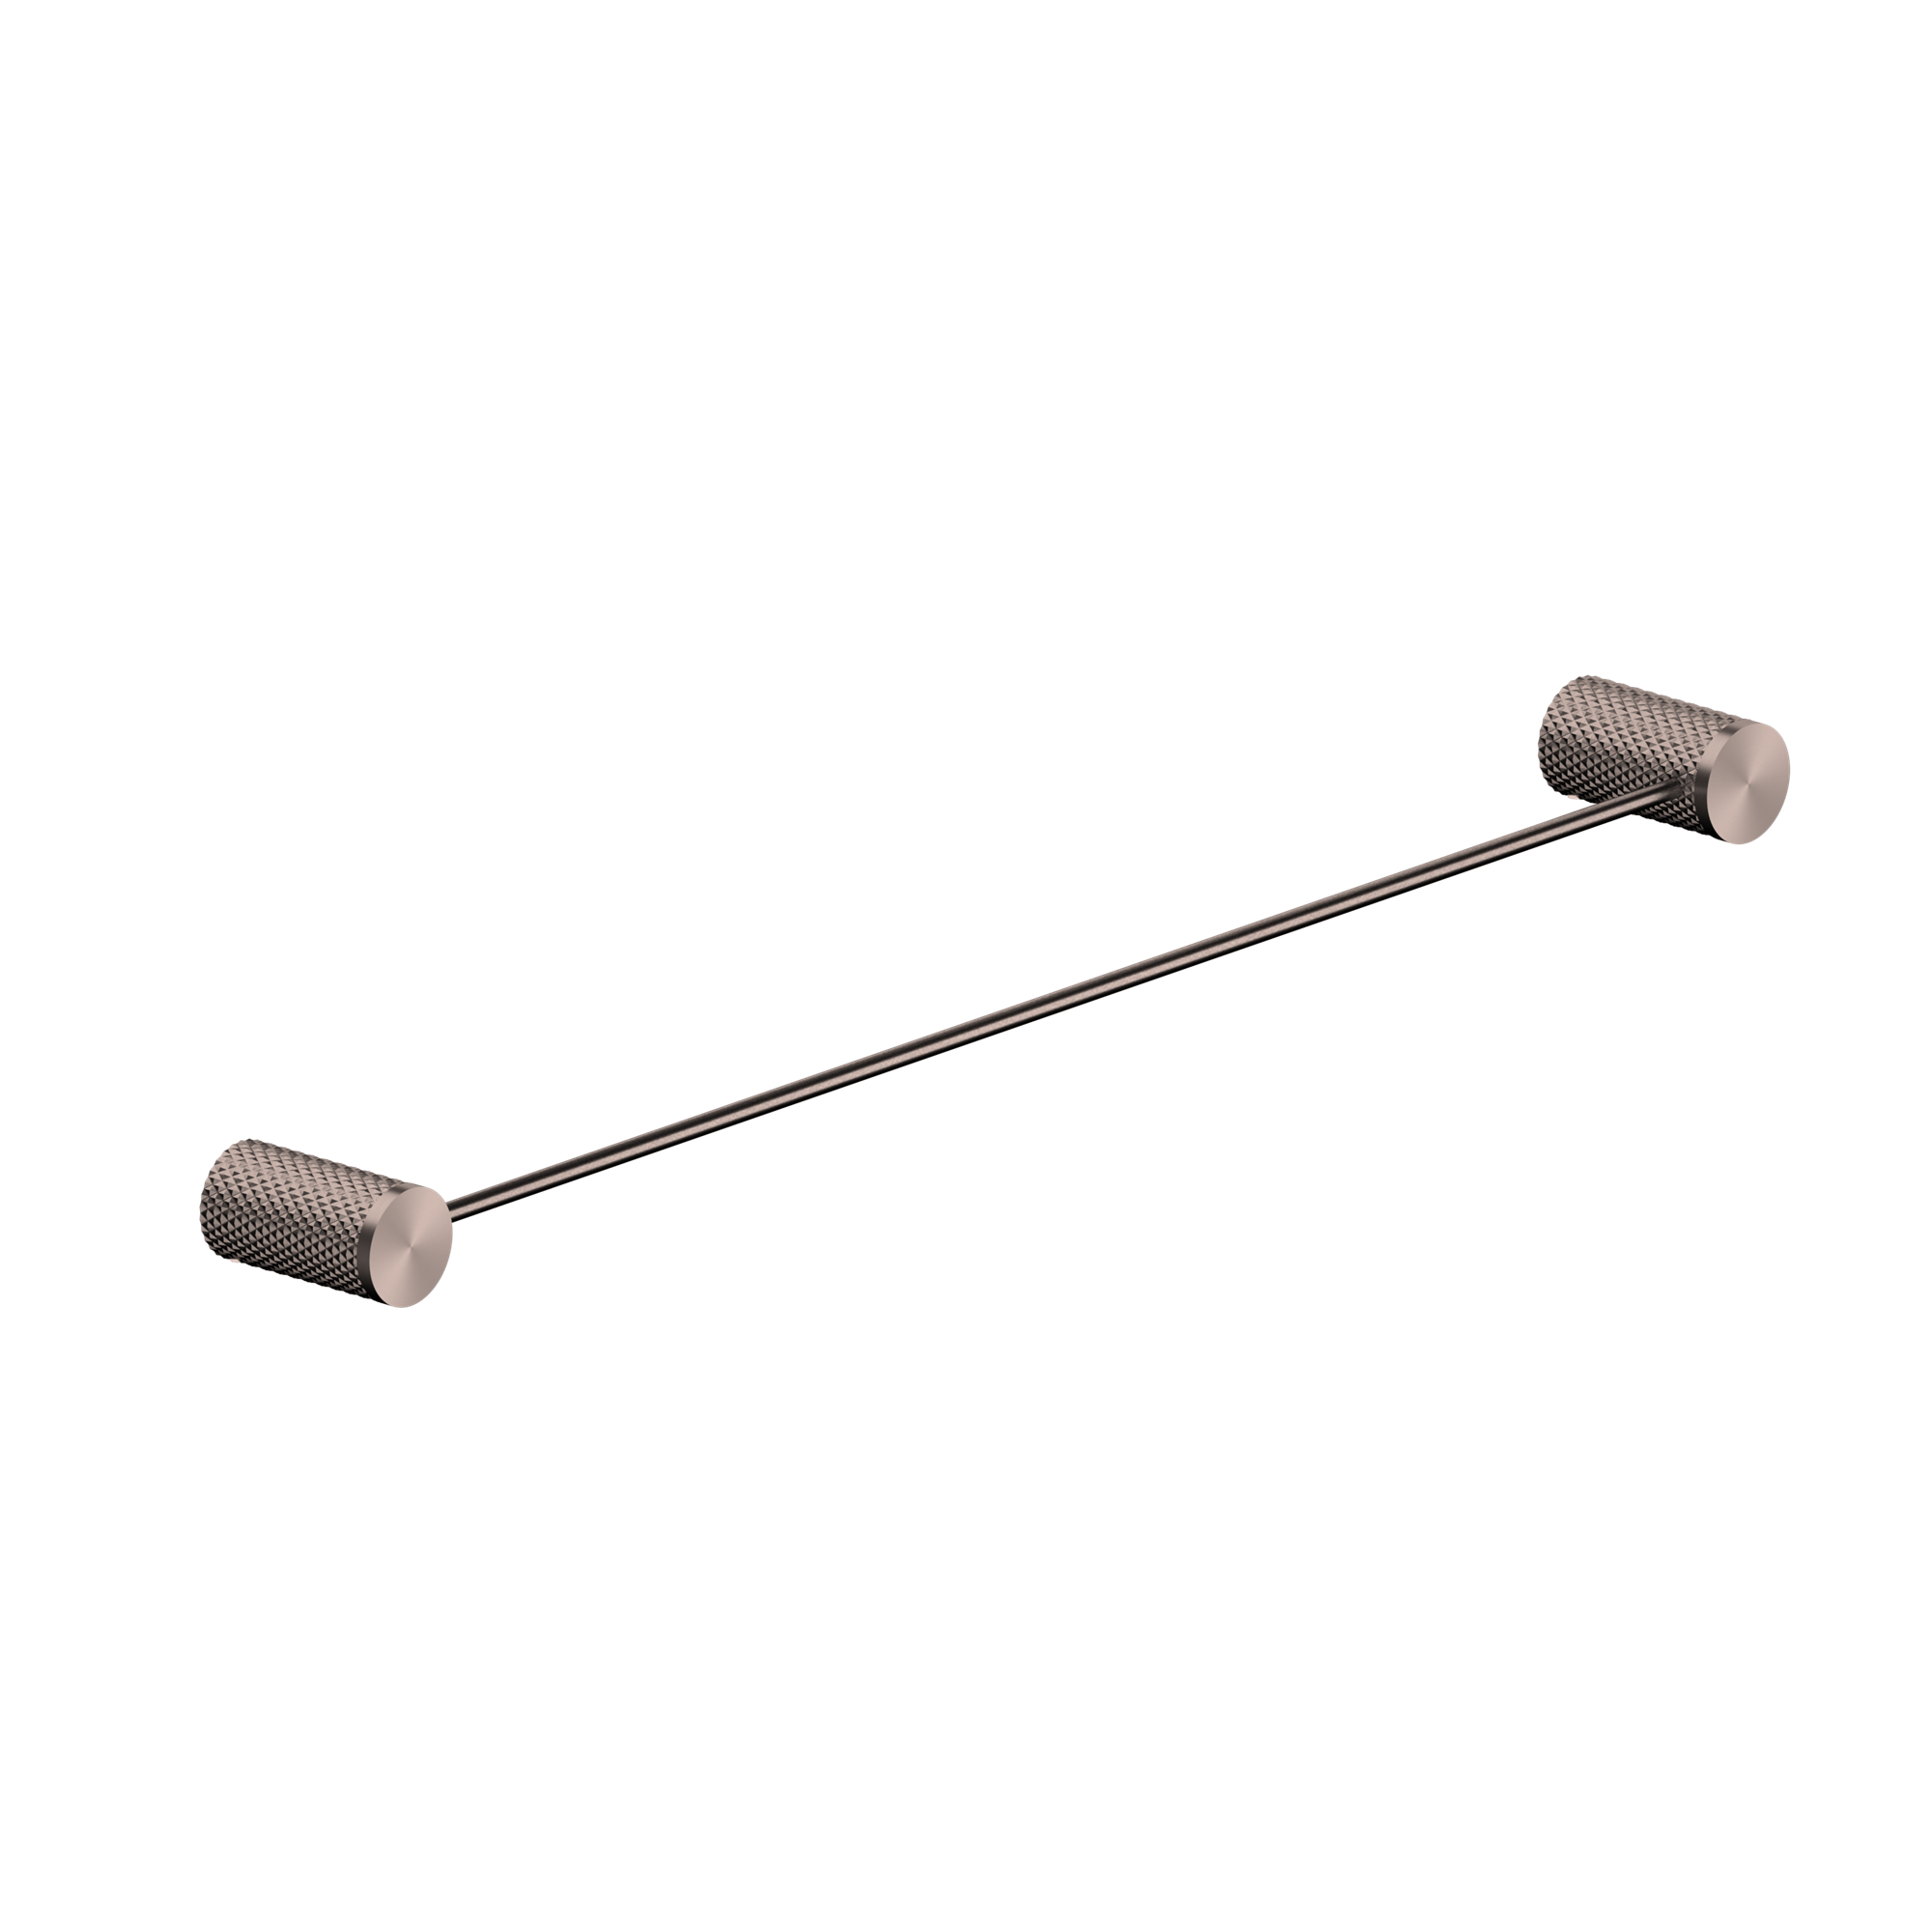 NERO OPAL NON-HEATED SINGLE TOWEL RAIL BRUSHED BRONZE (AVAILABLE IN 600MM AND 800MM)